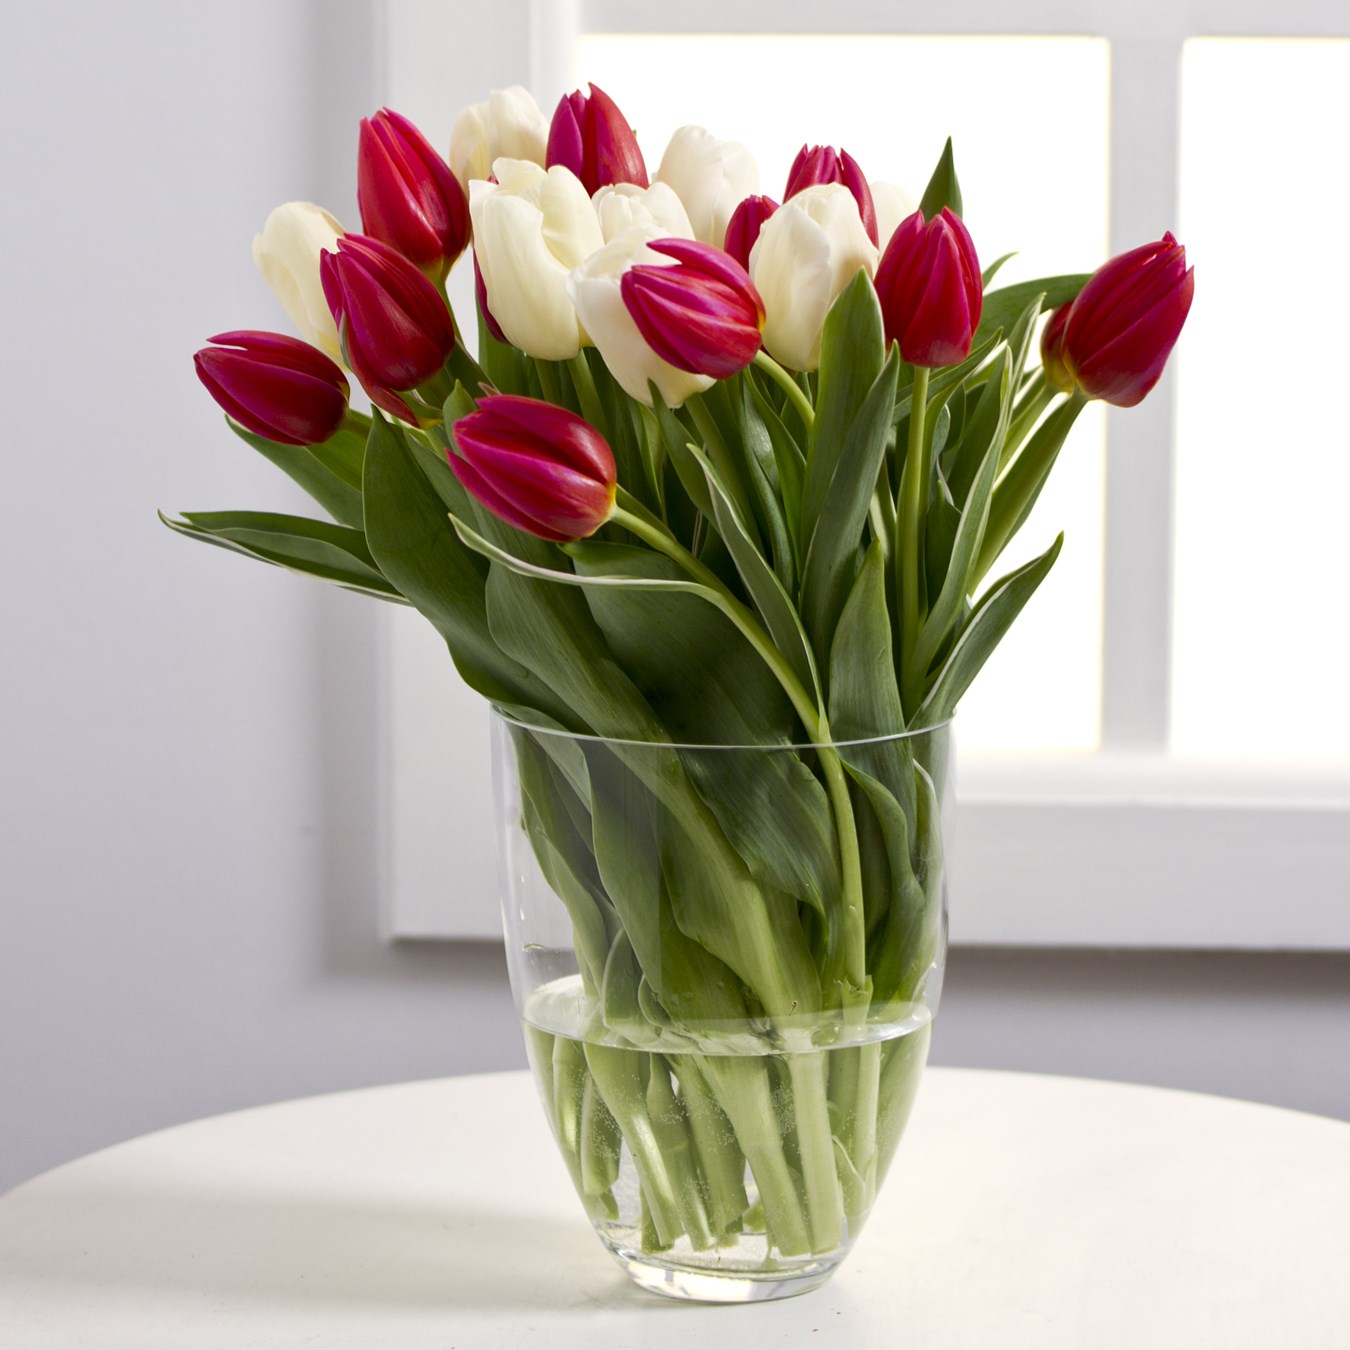 Bouquet of White and Red Tulips